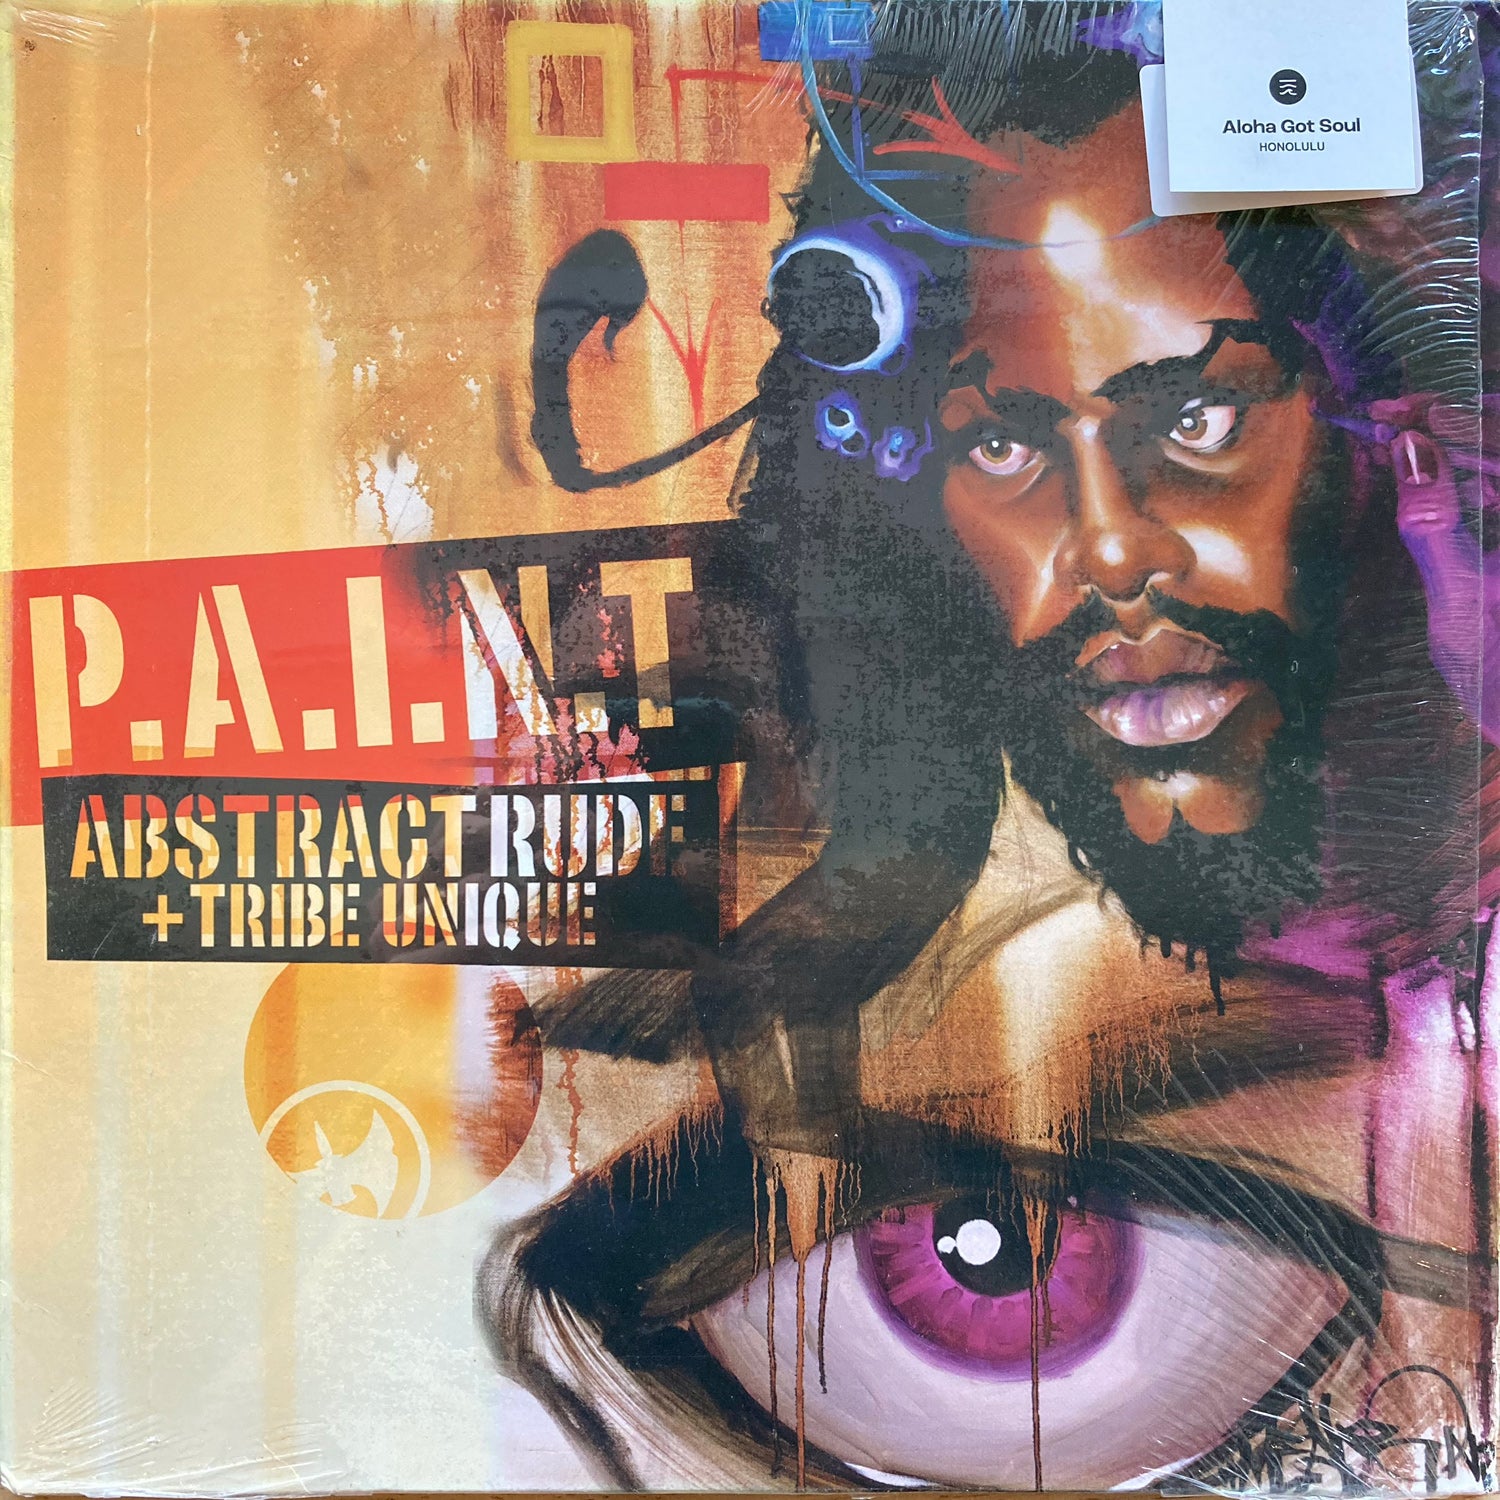 Abstract Rude + Tribe Unique - P.A.I.N.T.